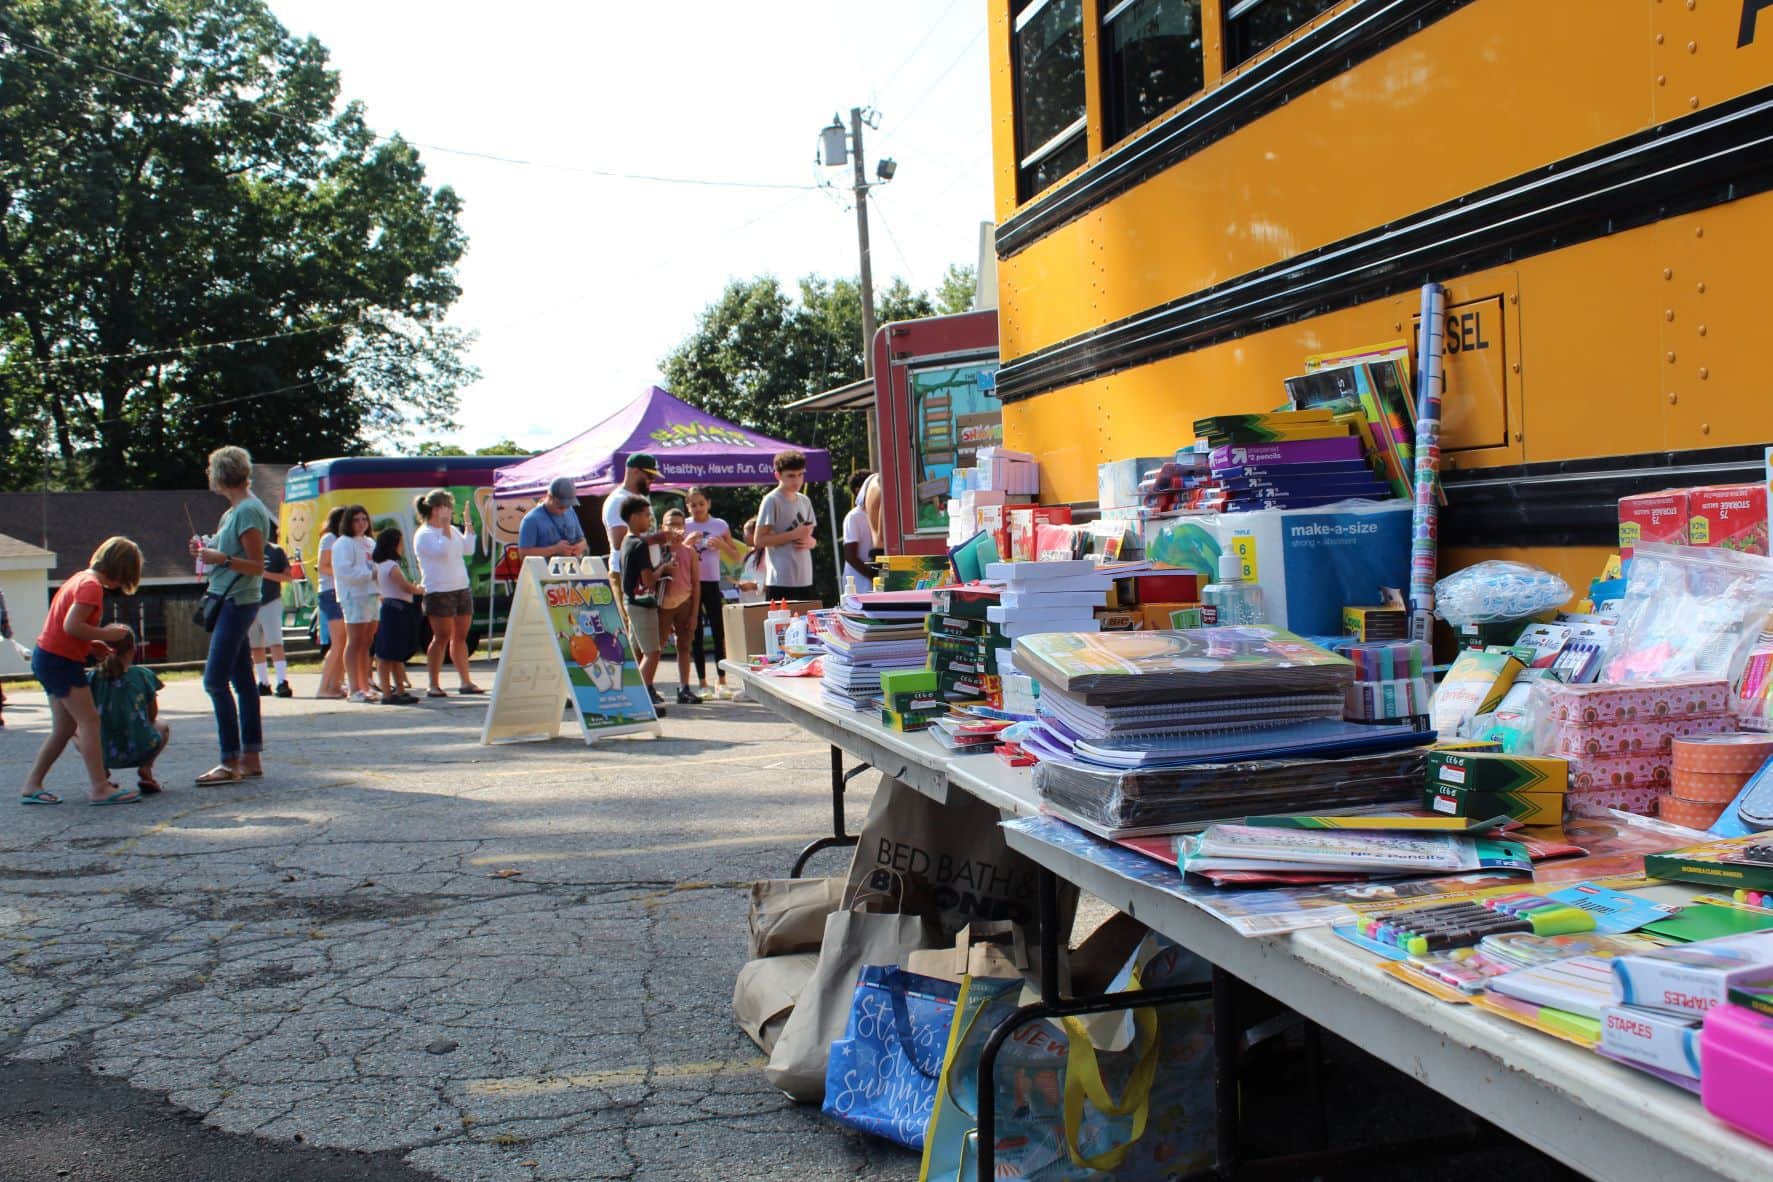 Festival attendees brought schools supplies, which were lined up against a school bus.